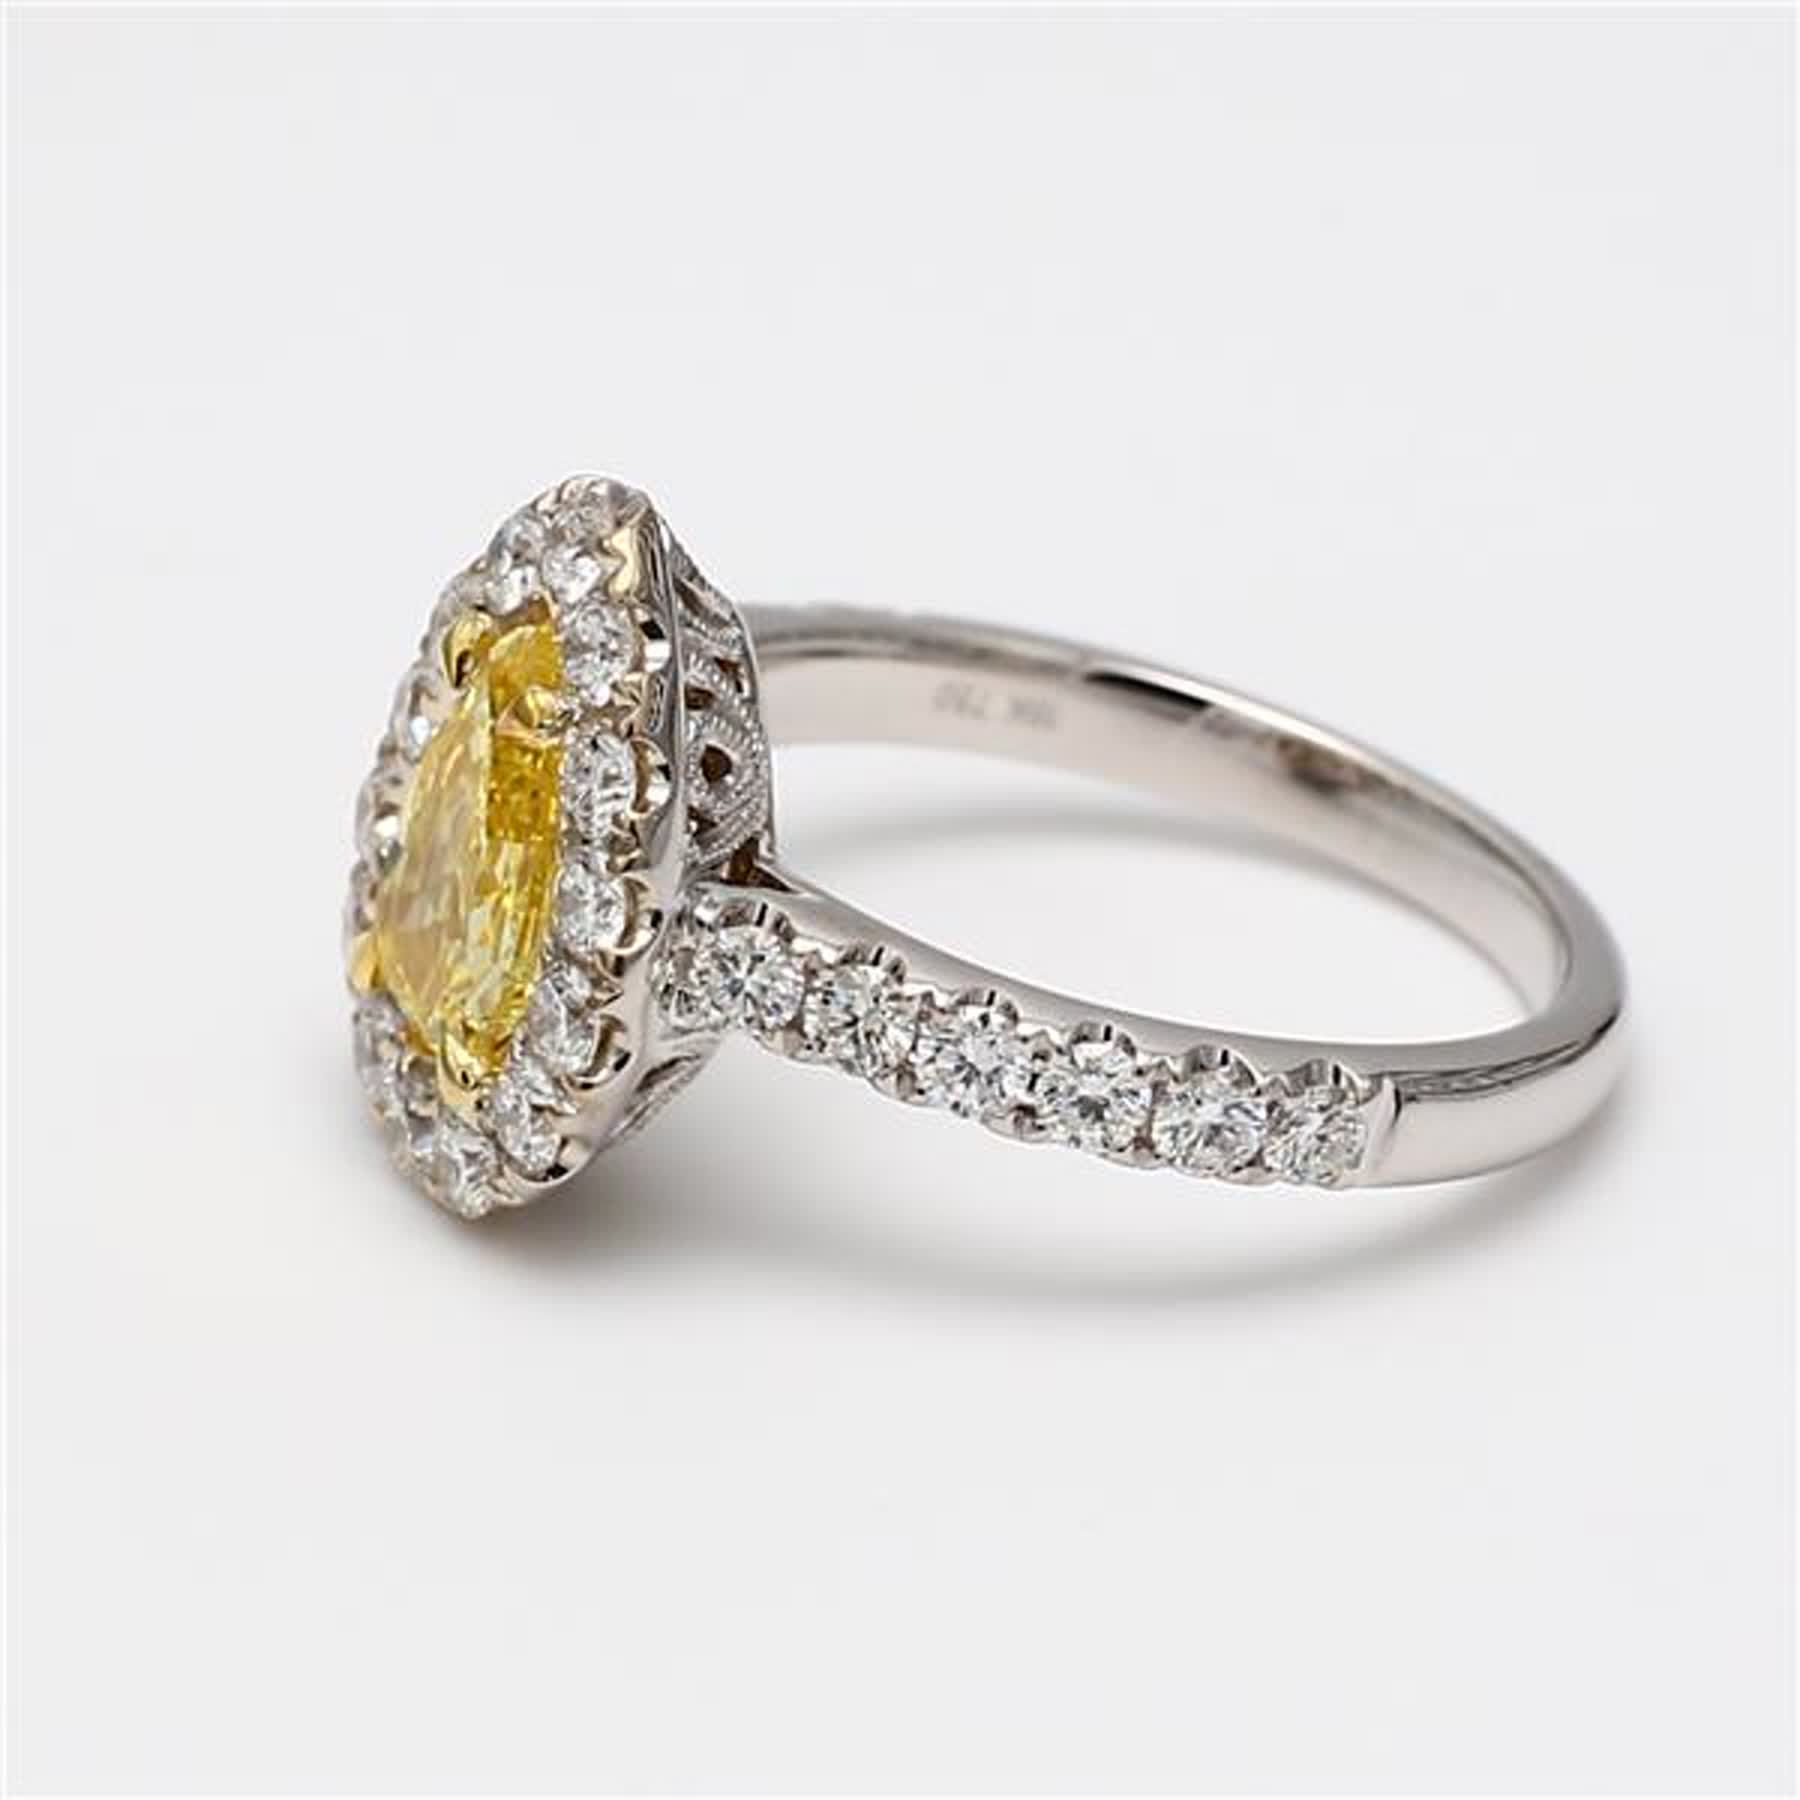 GIA Certified Natural Yellow Pear and White Diamond 1.90 Carat TW Gold Ring